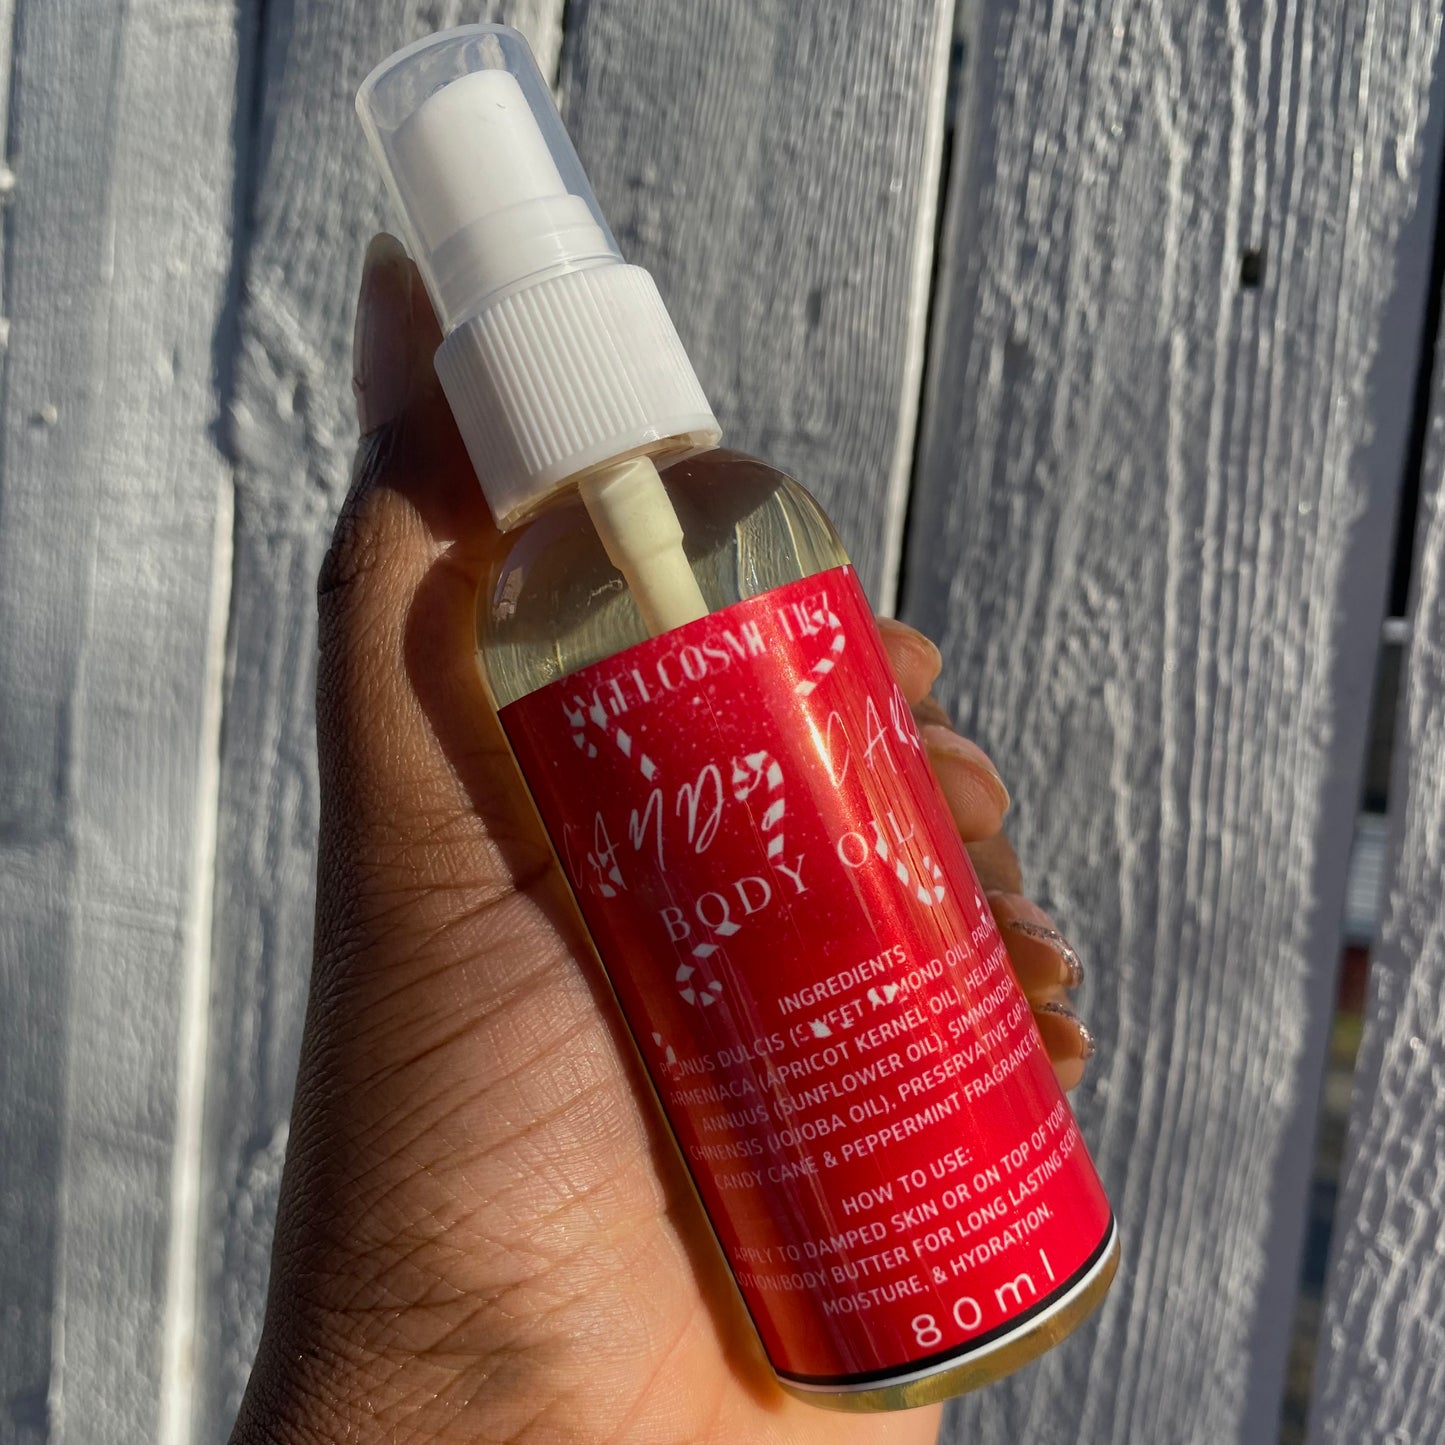 Candy Cane Body Oil